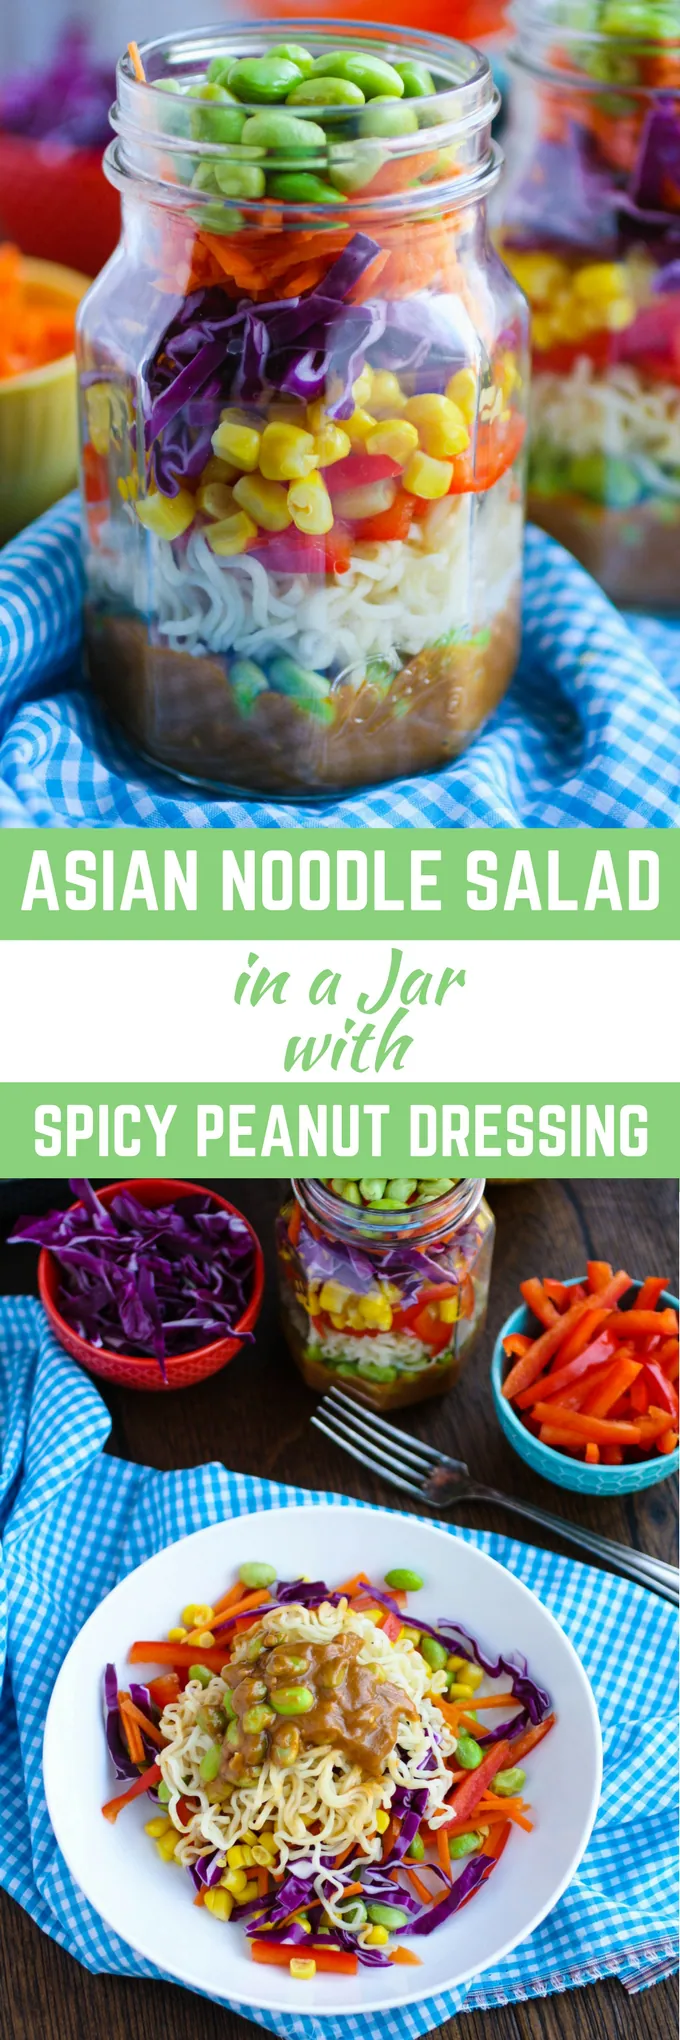 Asian Noodle Salad in a Jar with Spicy Peanut Dressing makes a great summer meal. You'll also love it as a take-to-work lunch. Super convenient, and delicious!